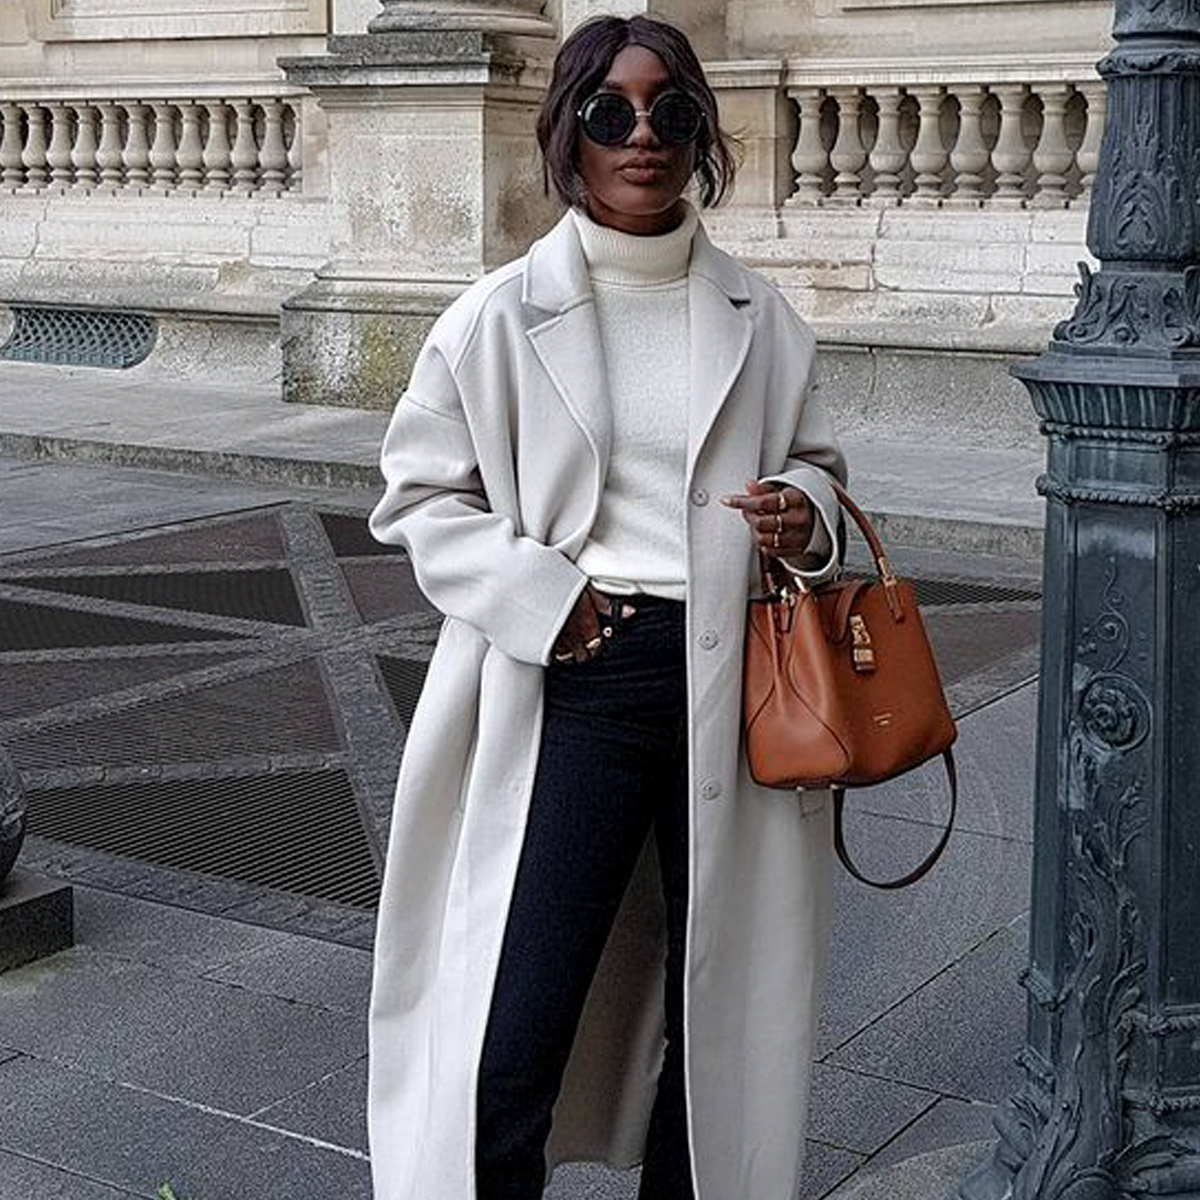 11 Classic Autumn Fashion Items That Look Incredibly Chic